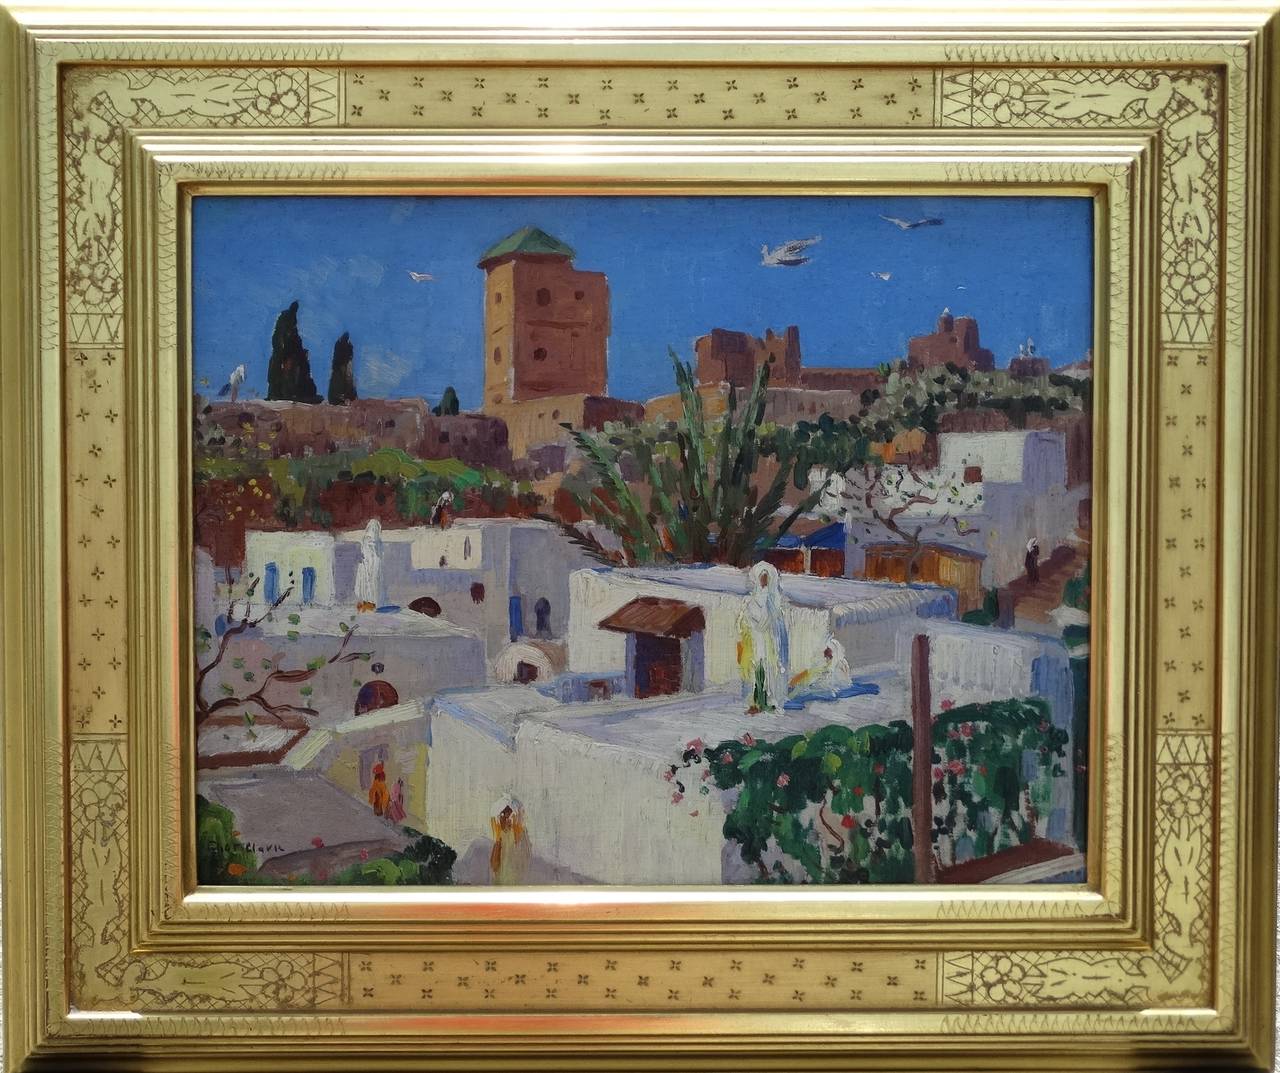 Rooftops, Rabat, Morocco - Painting by Eliot Clark